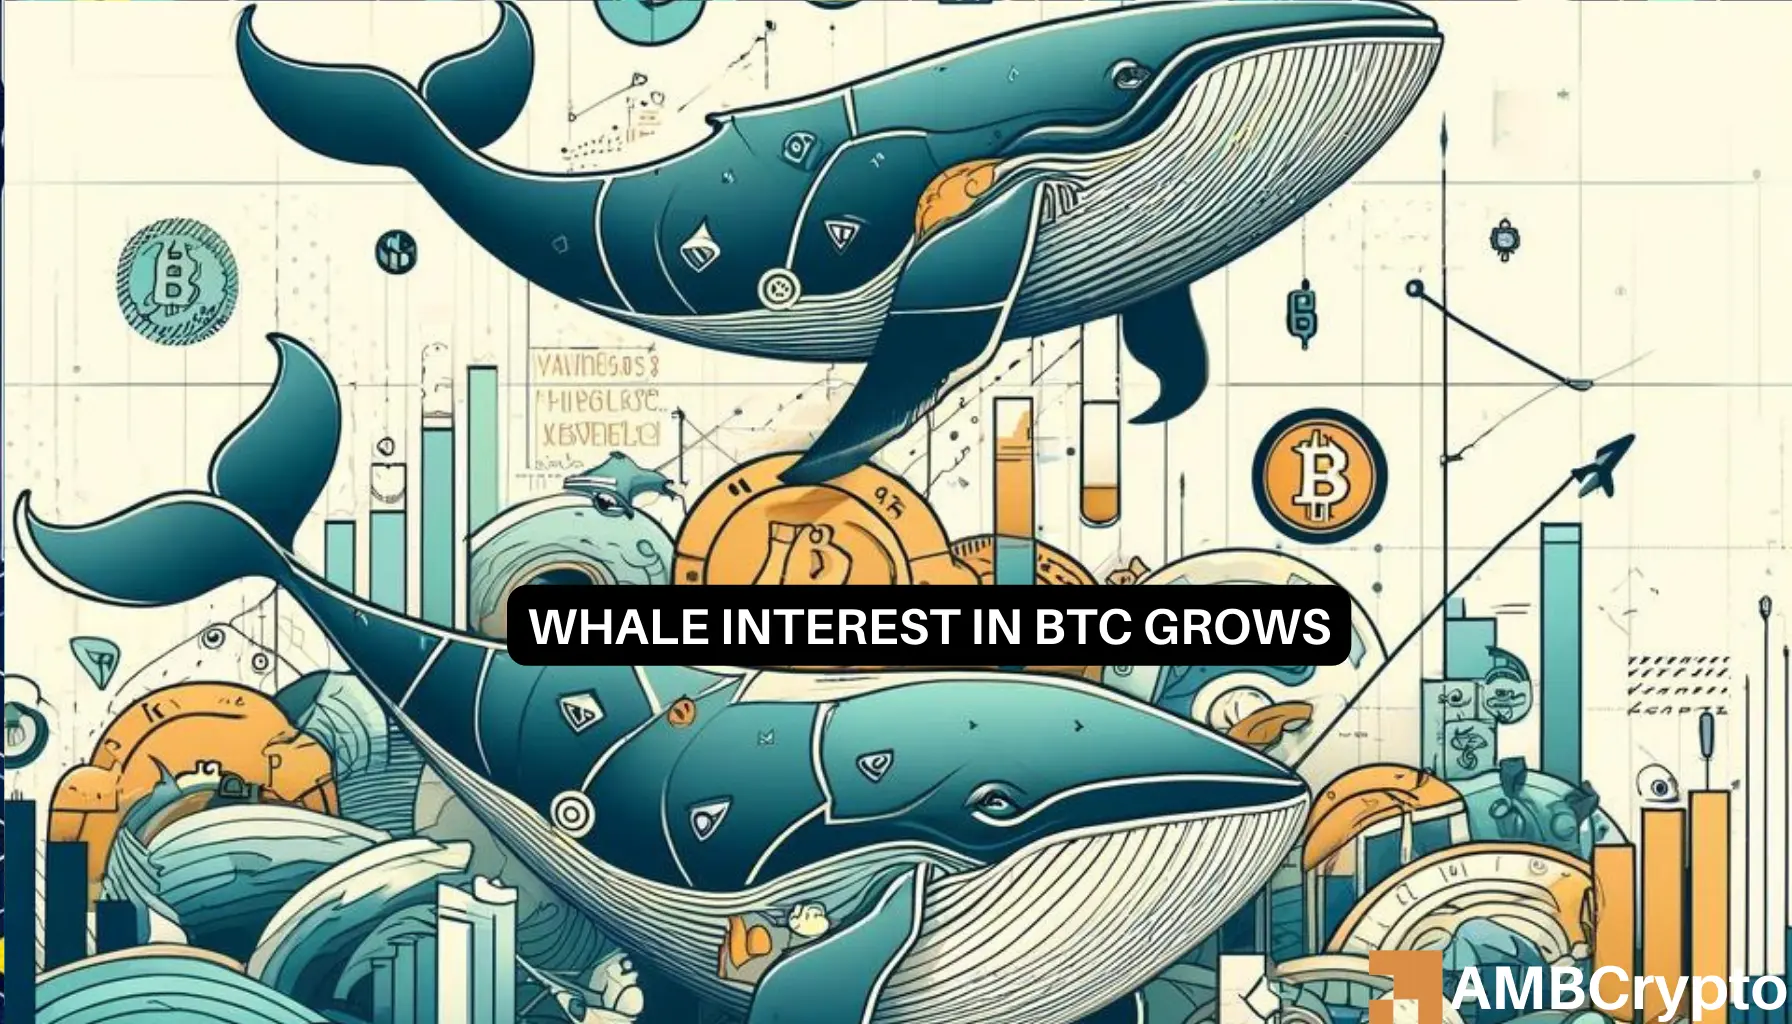 Bitcoin: Record high BTC accumulation by whales, will prices follow?